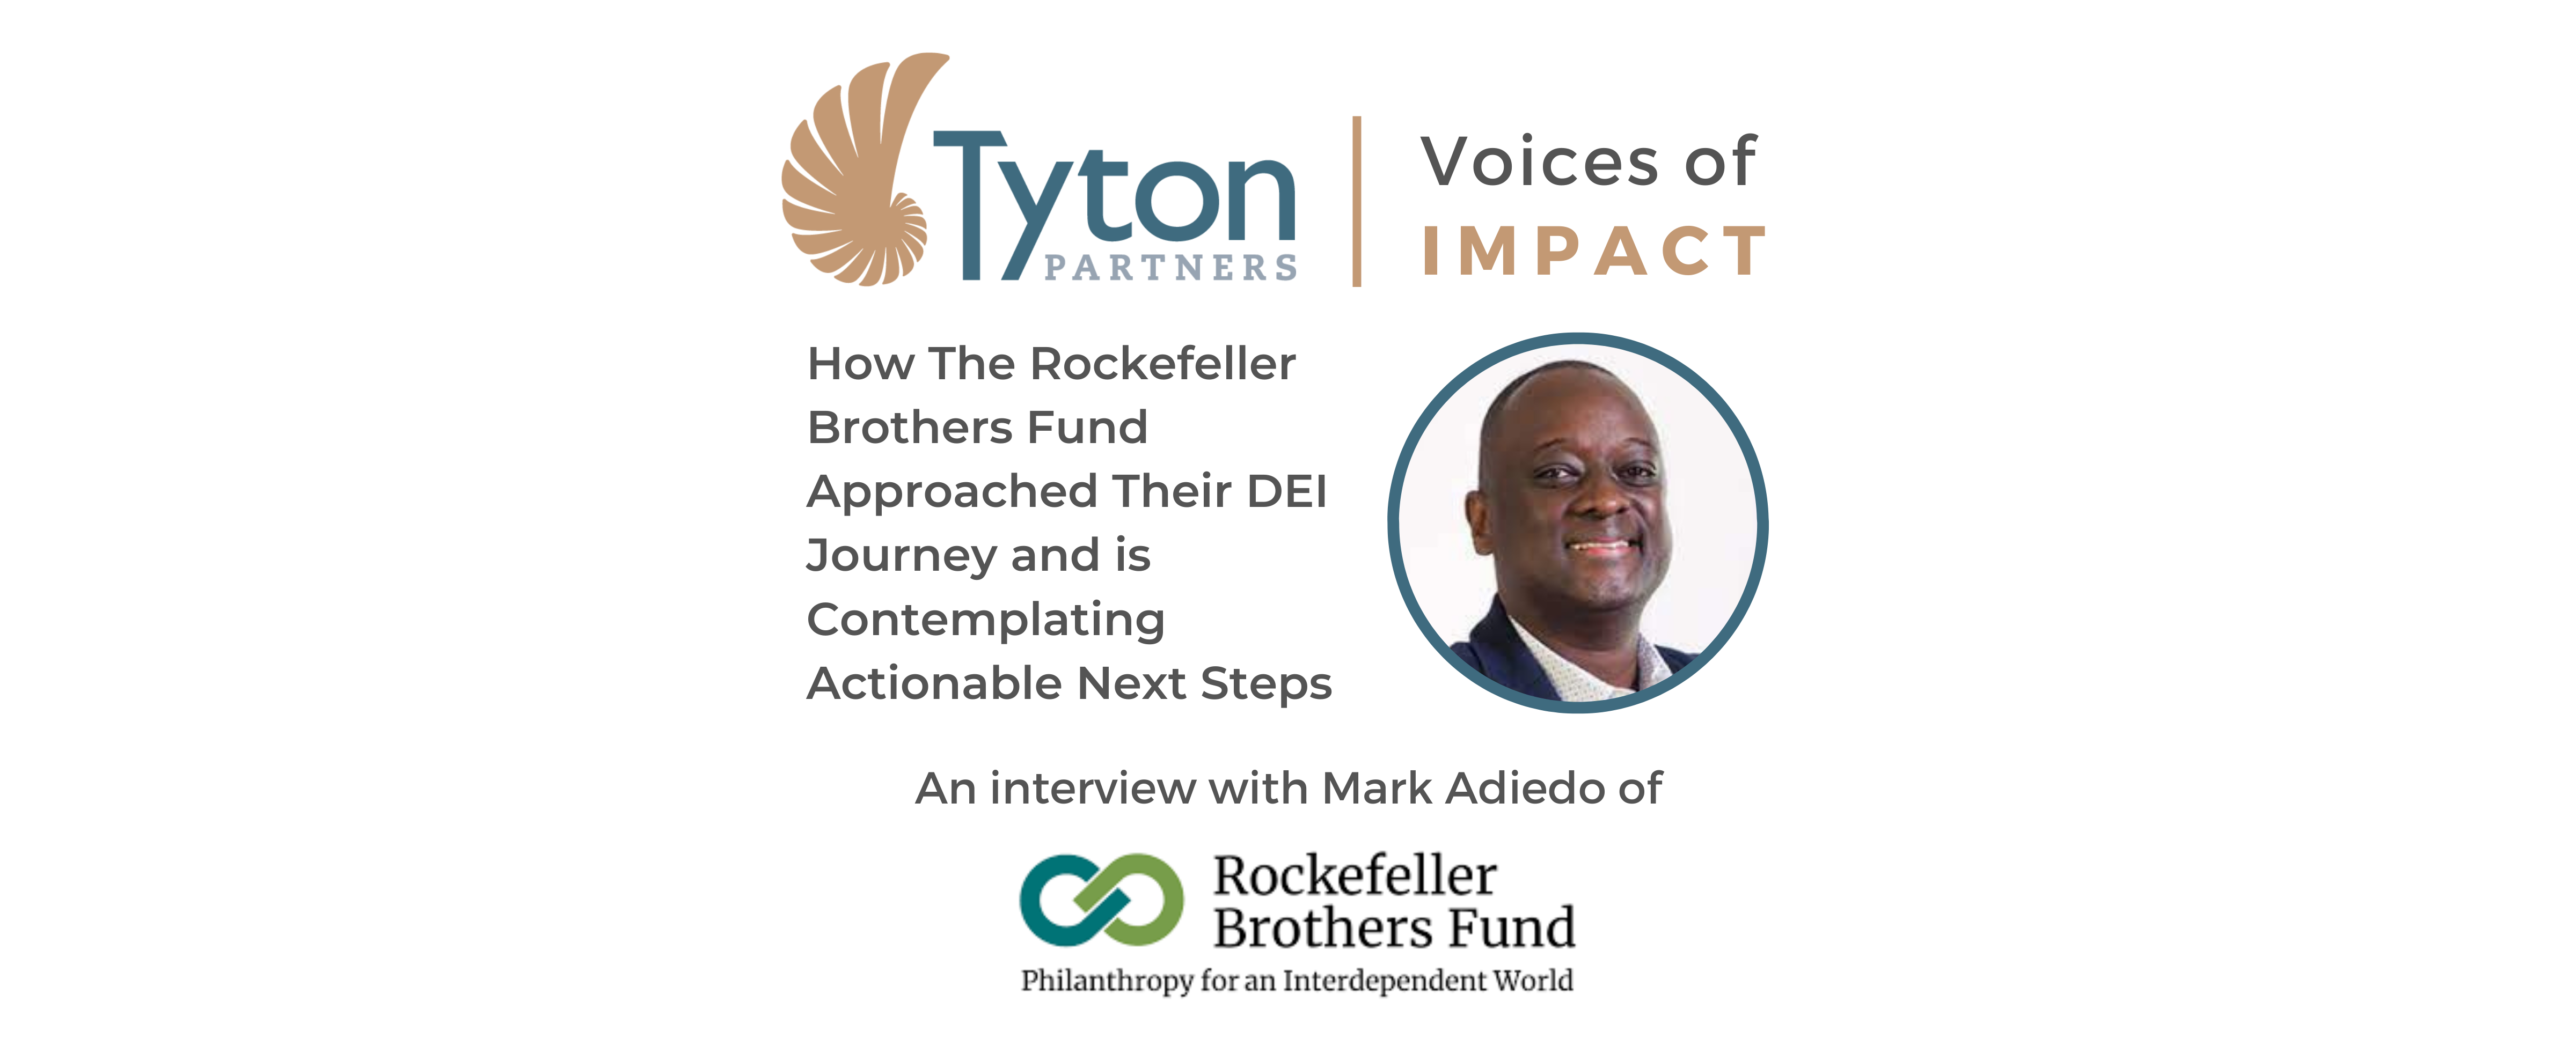 Tyton Partners Voices of Impact Interview: Mark Adiedo of Rockefeller Brothers Fund